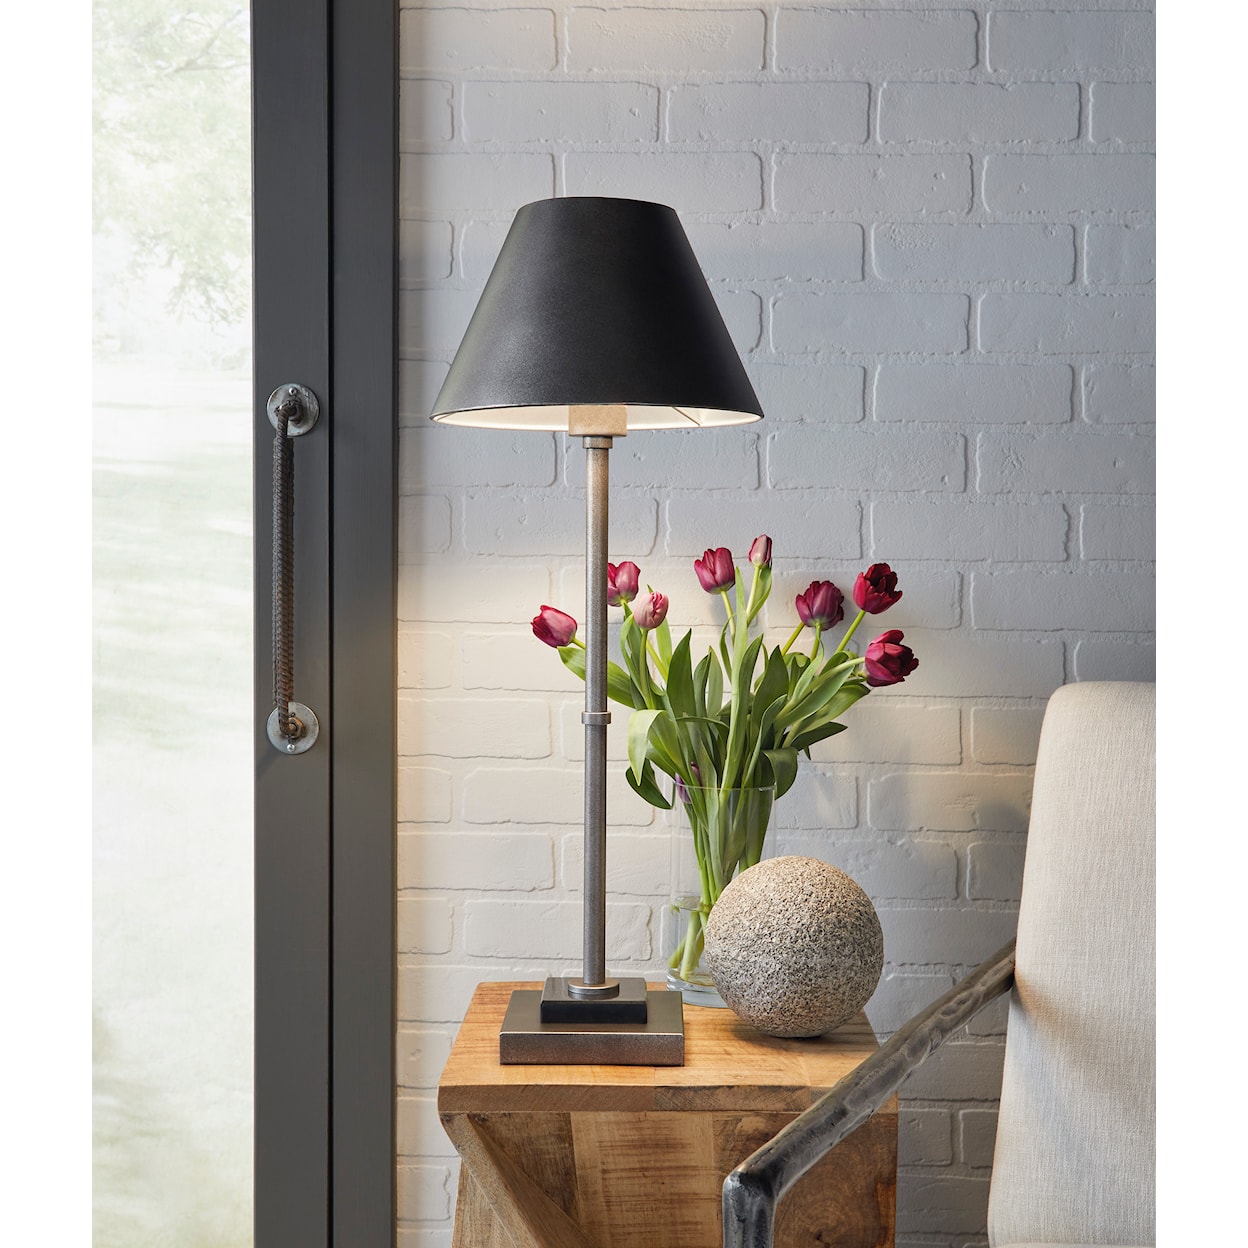 Signature Design by Ashley Lamps - Traditional Classics Belldunn Table Lamp